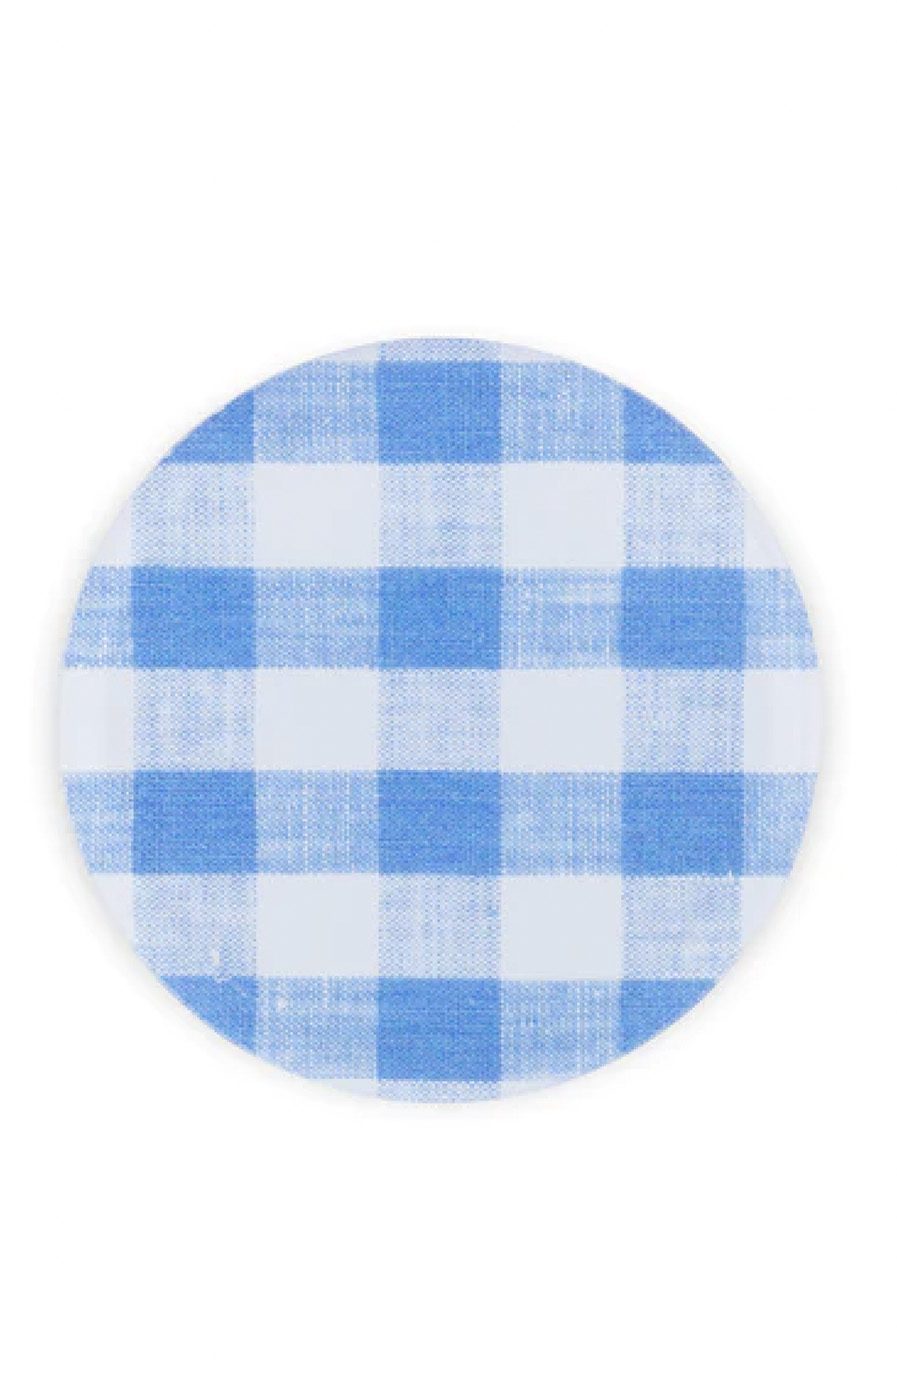 Blue Gingham Coasters from Proper Table